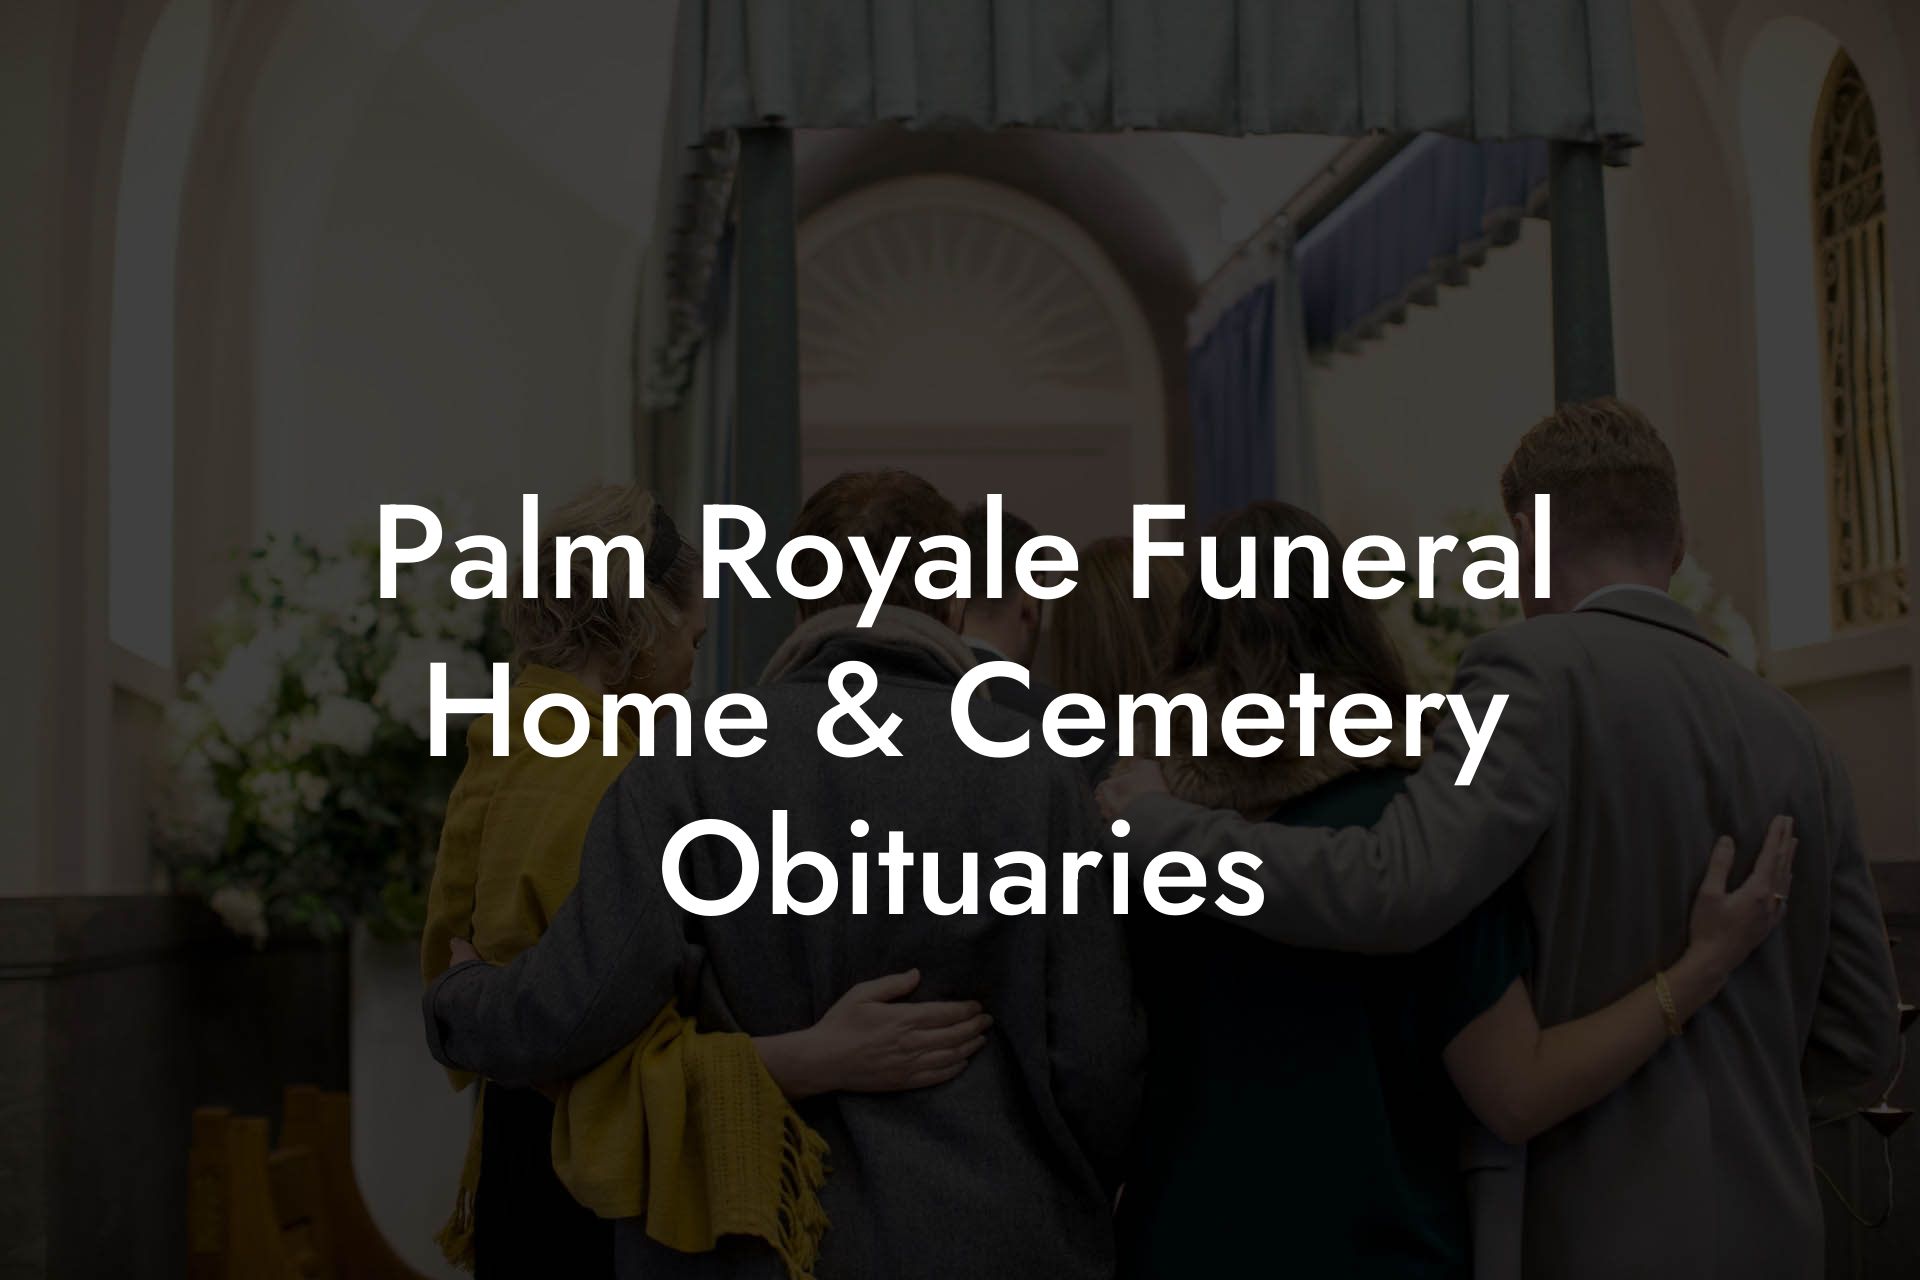 Palm Royale Funeral Home & Cemetery Obituaries